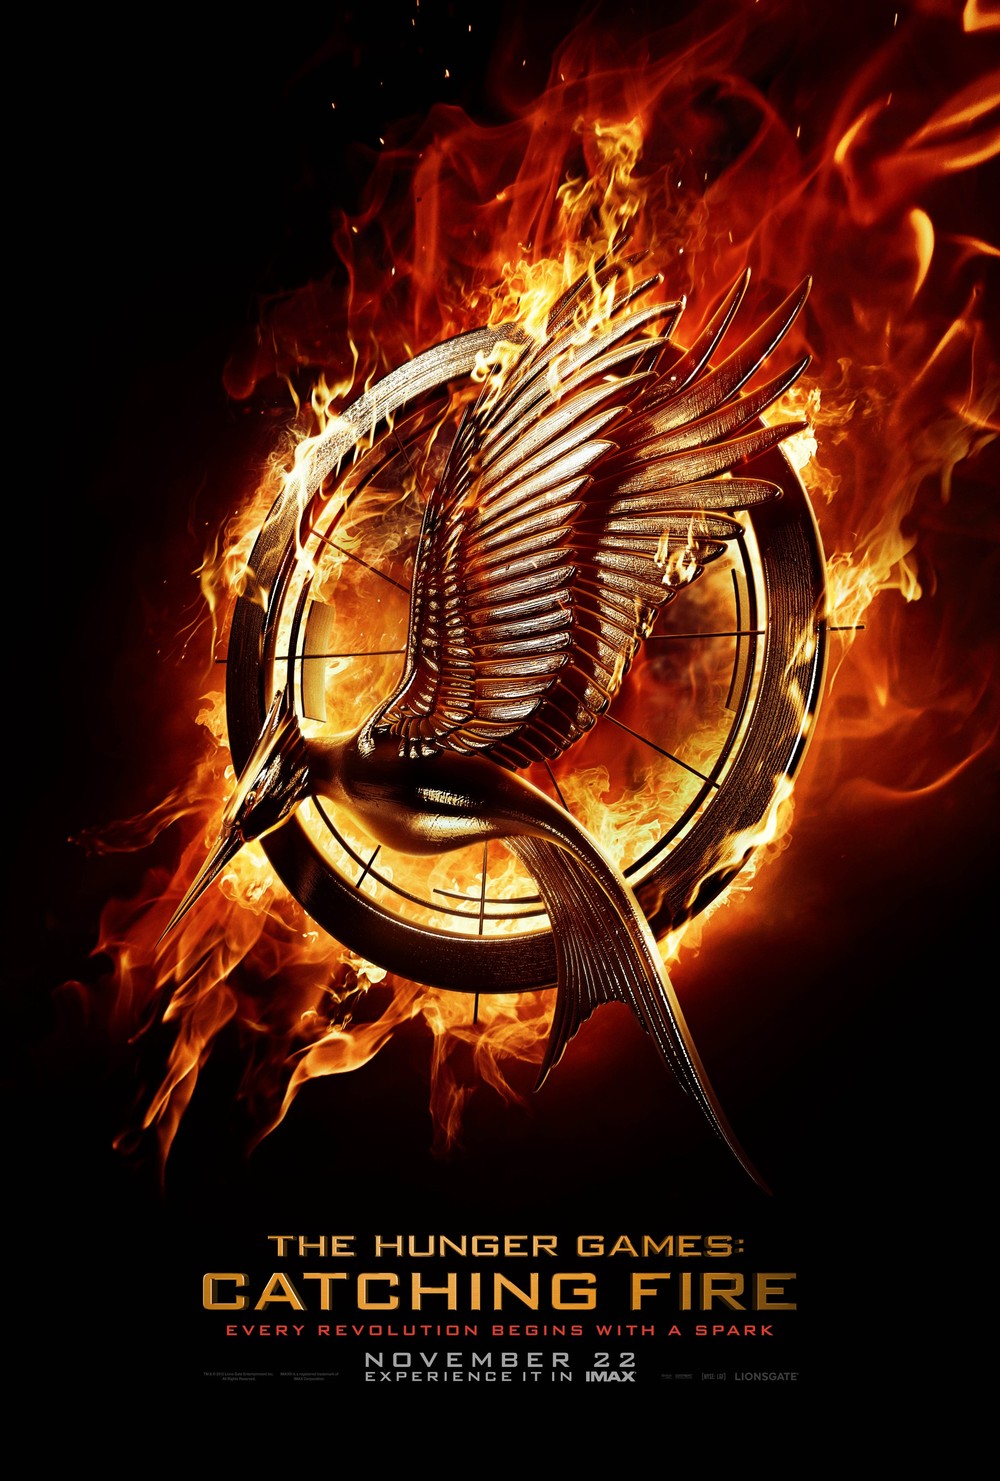 The Hunger Games: Mockingjay - Part 1 Trailer to Debut on 